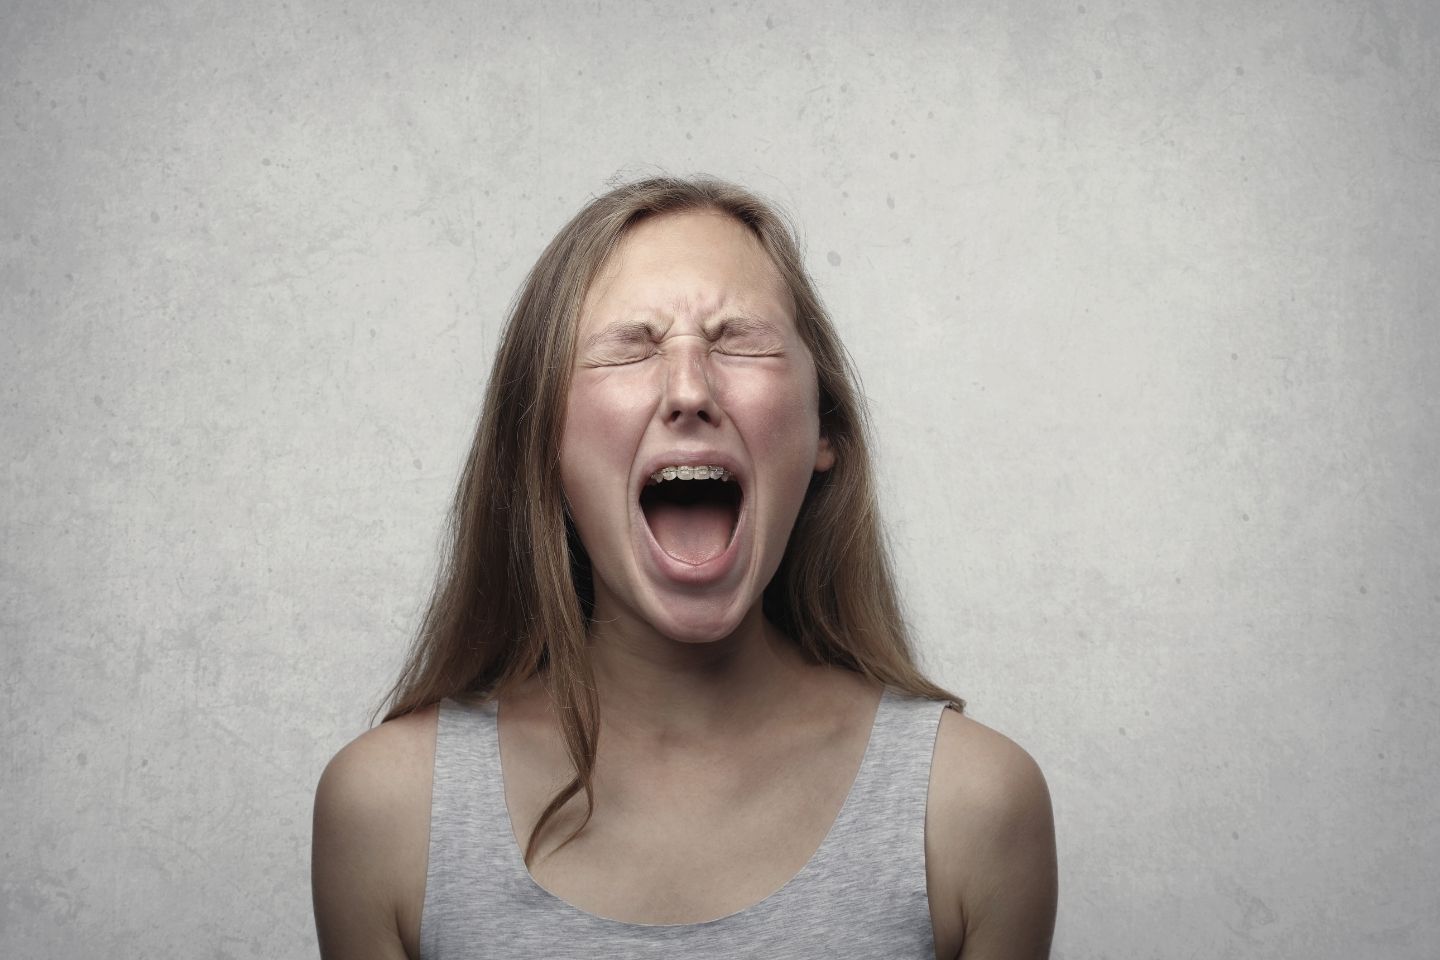 games to control anger